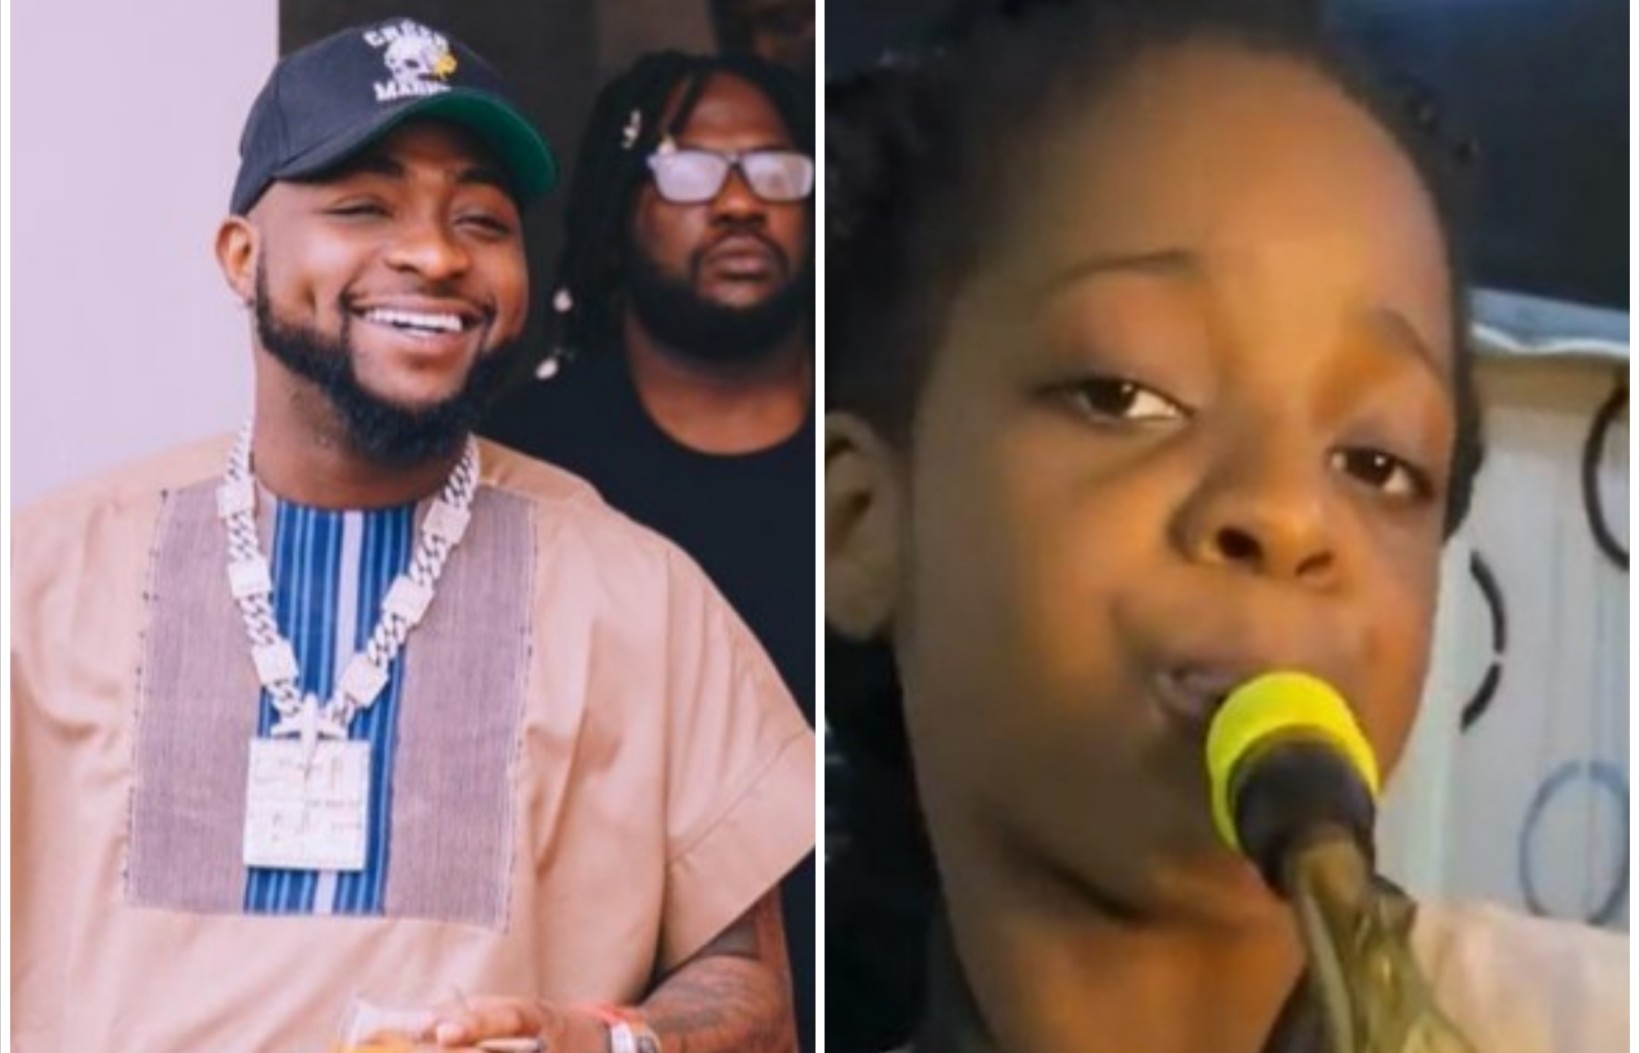 10-year-old Saxophonist Gets N500K From Davido for Playing ‘Jowo’ Perfectly [Video]